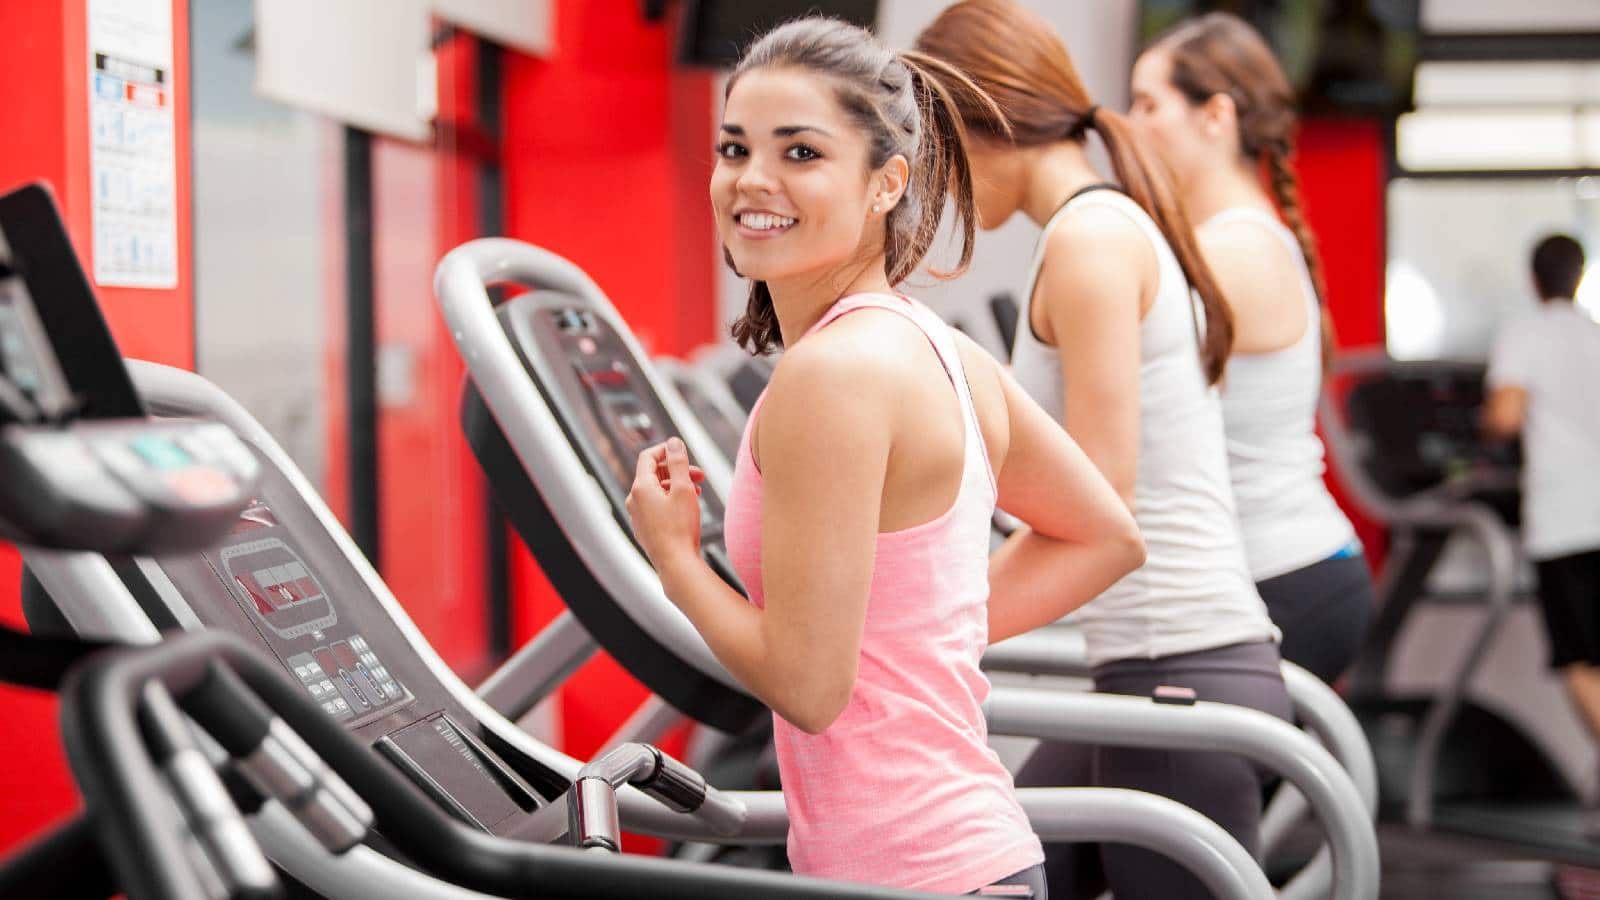 Treadmill workouts Is it safe to go beyond walking or